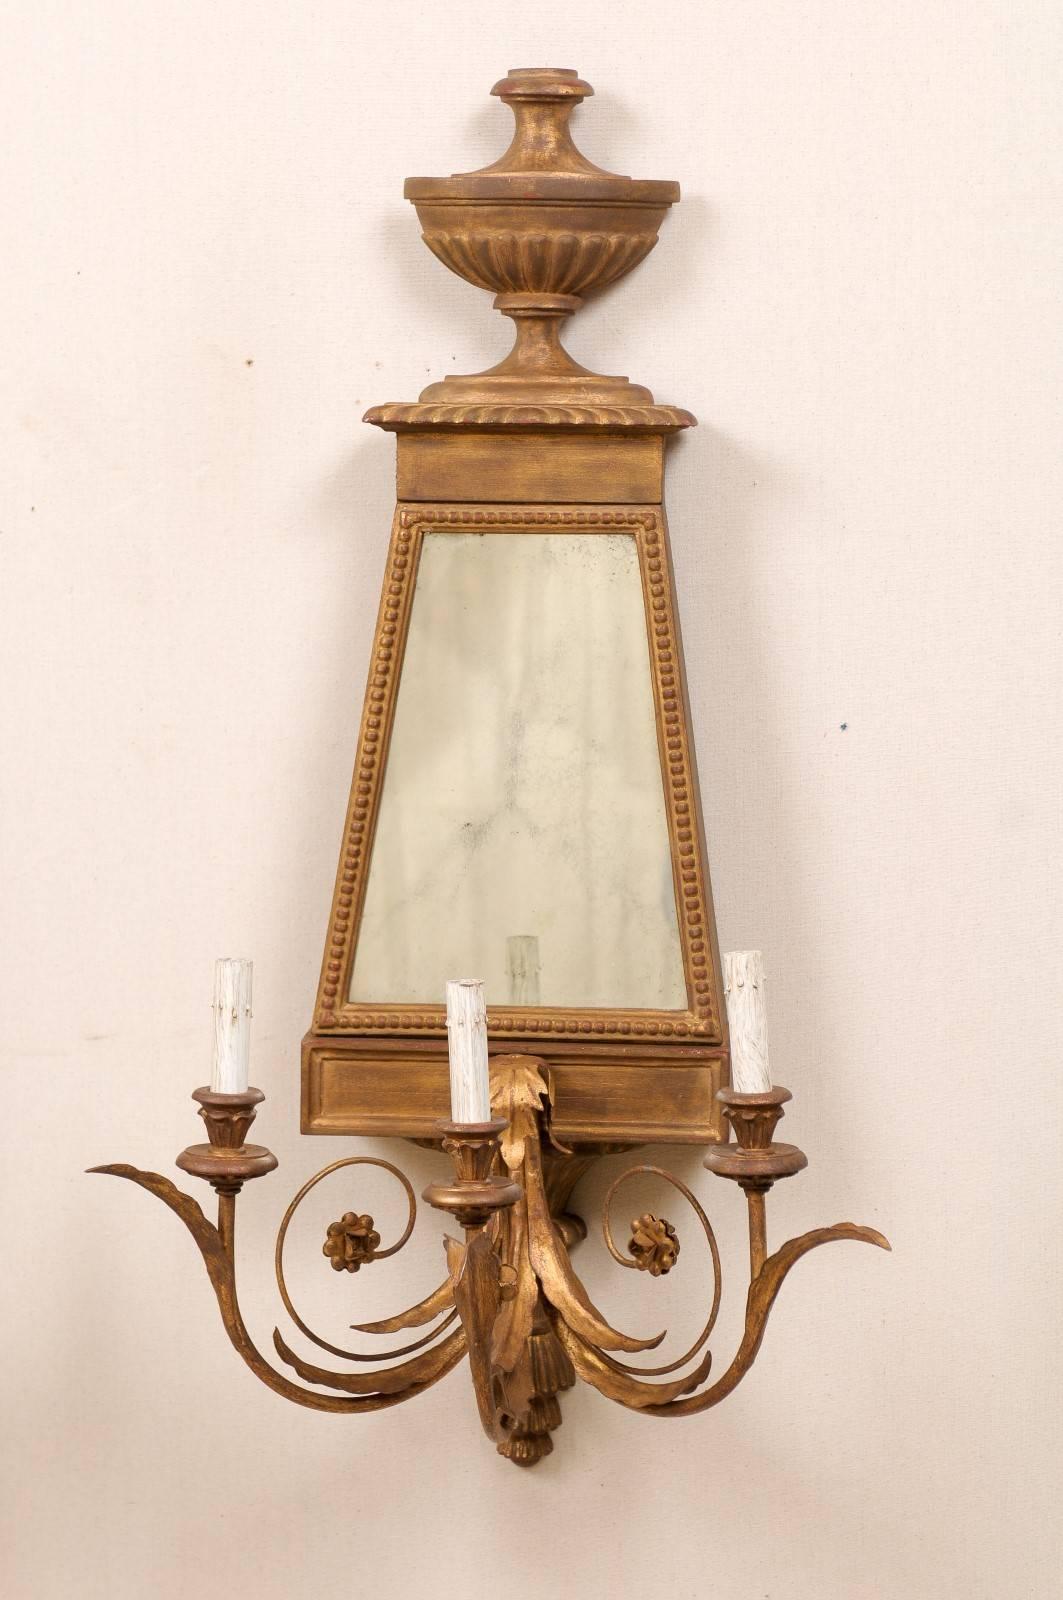 20th Century Pair of Italian Mirrored Sconces Made of Wood and Metal in Gold/Bronze Color